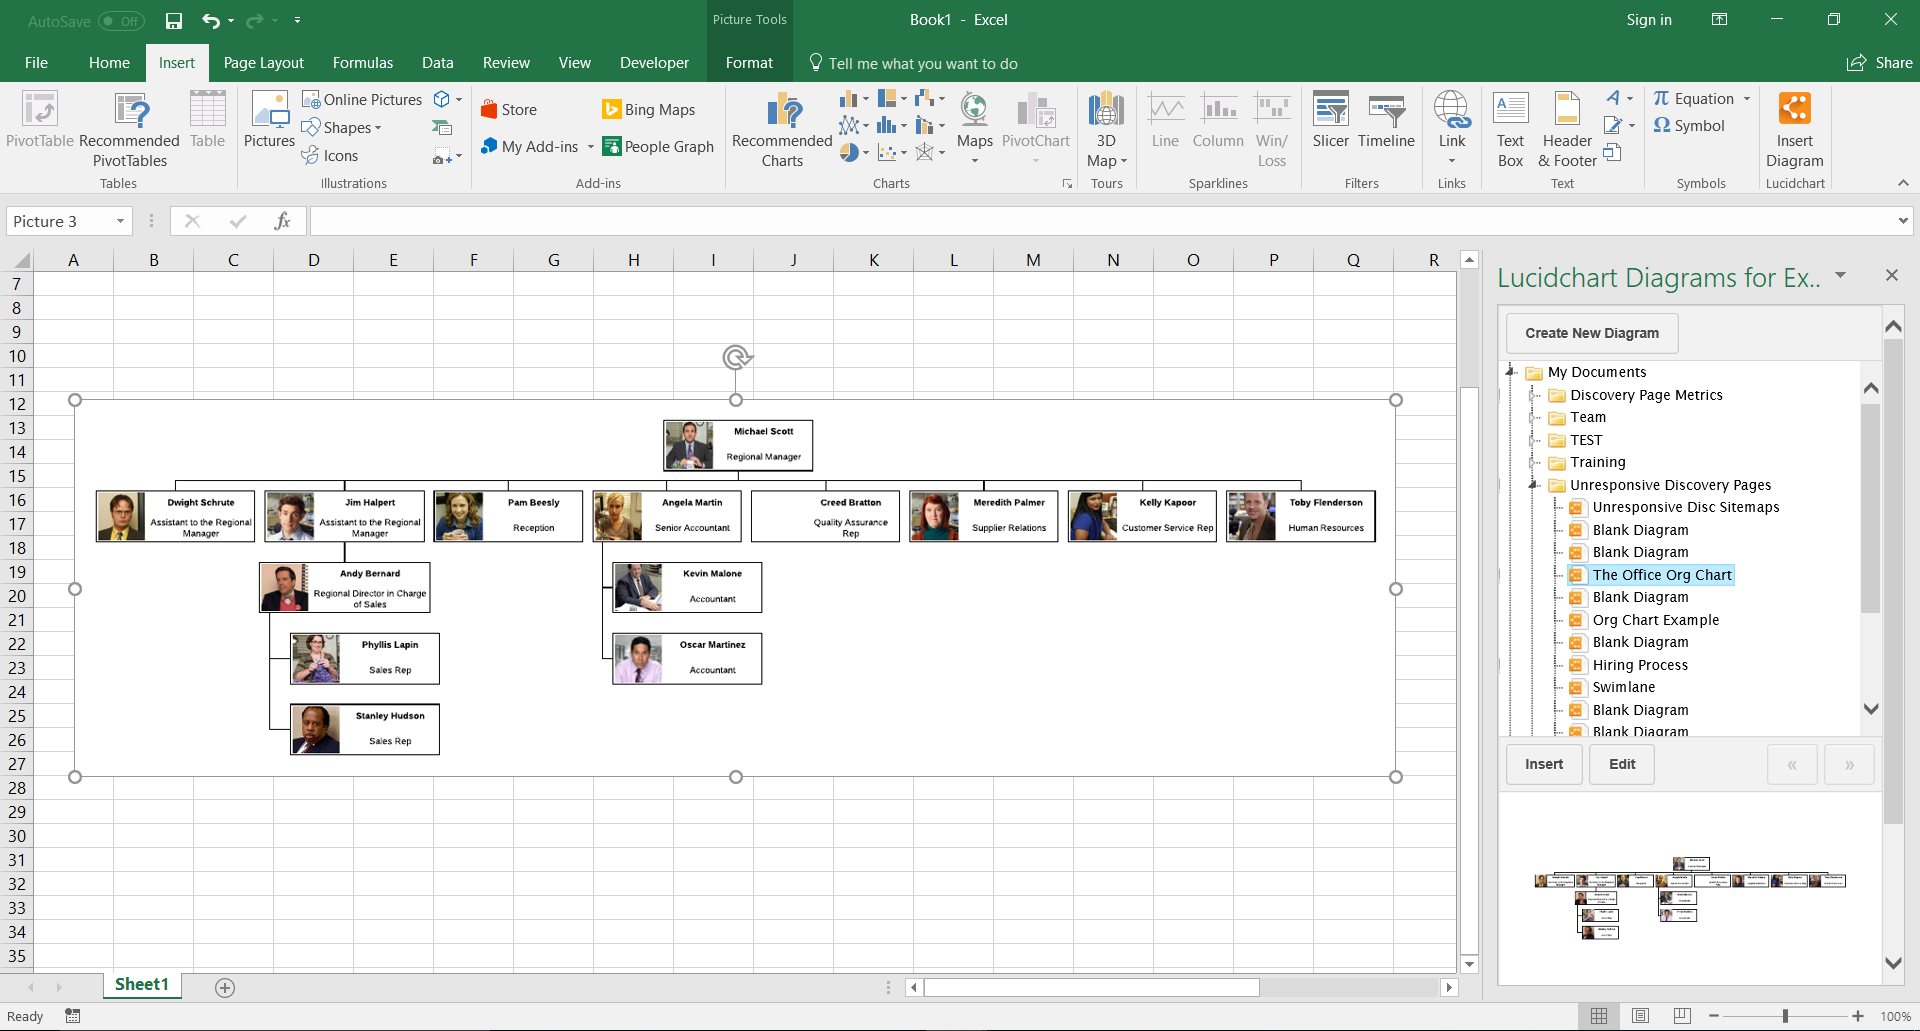 How To Make An Excel Spreadsheet Shared 2016 inside How To Make An Org Chart In Excel  Lucidchart